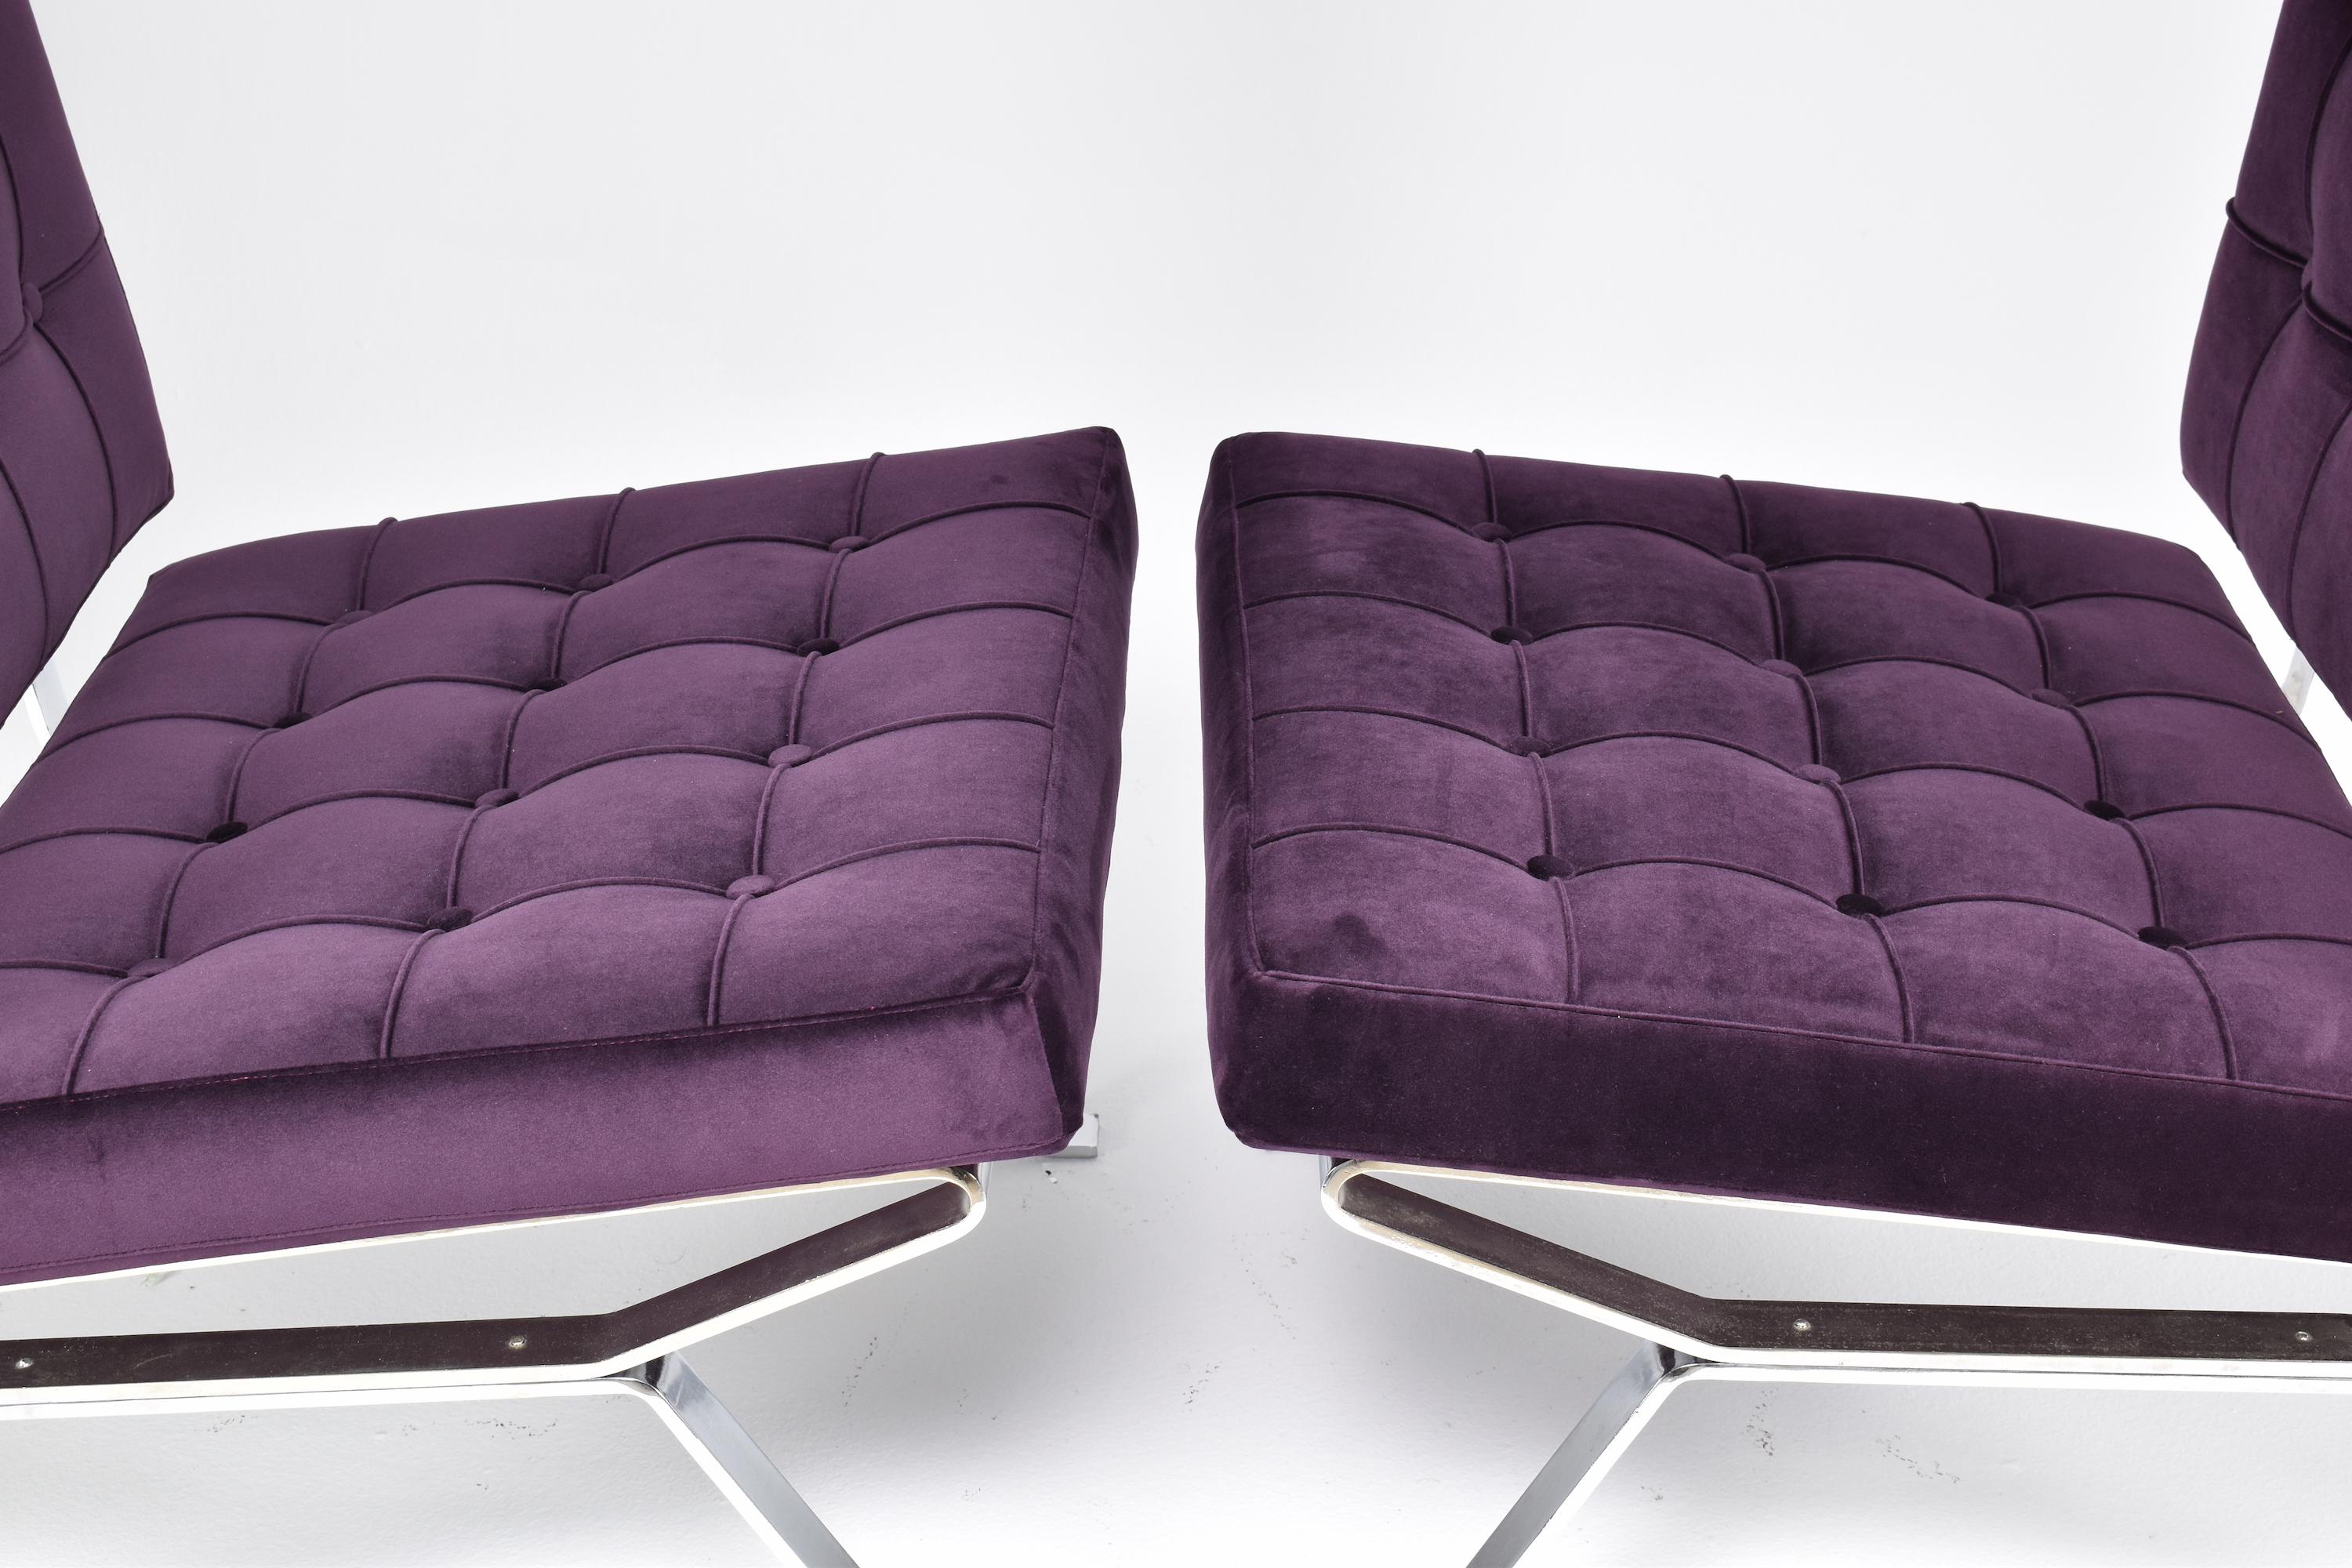 Pair of Italian Midcentury Dione Gastone Rinaldi Lounge Chairs, 1950s For Sale 3